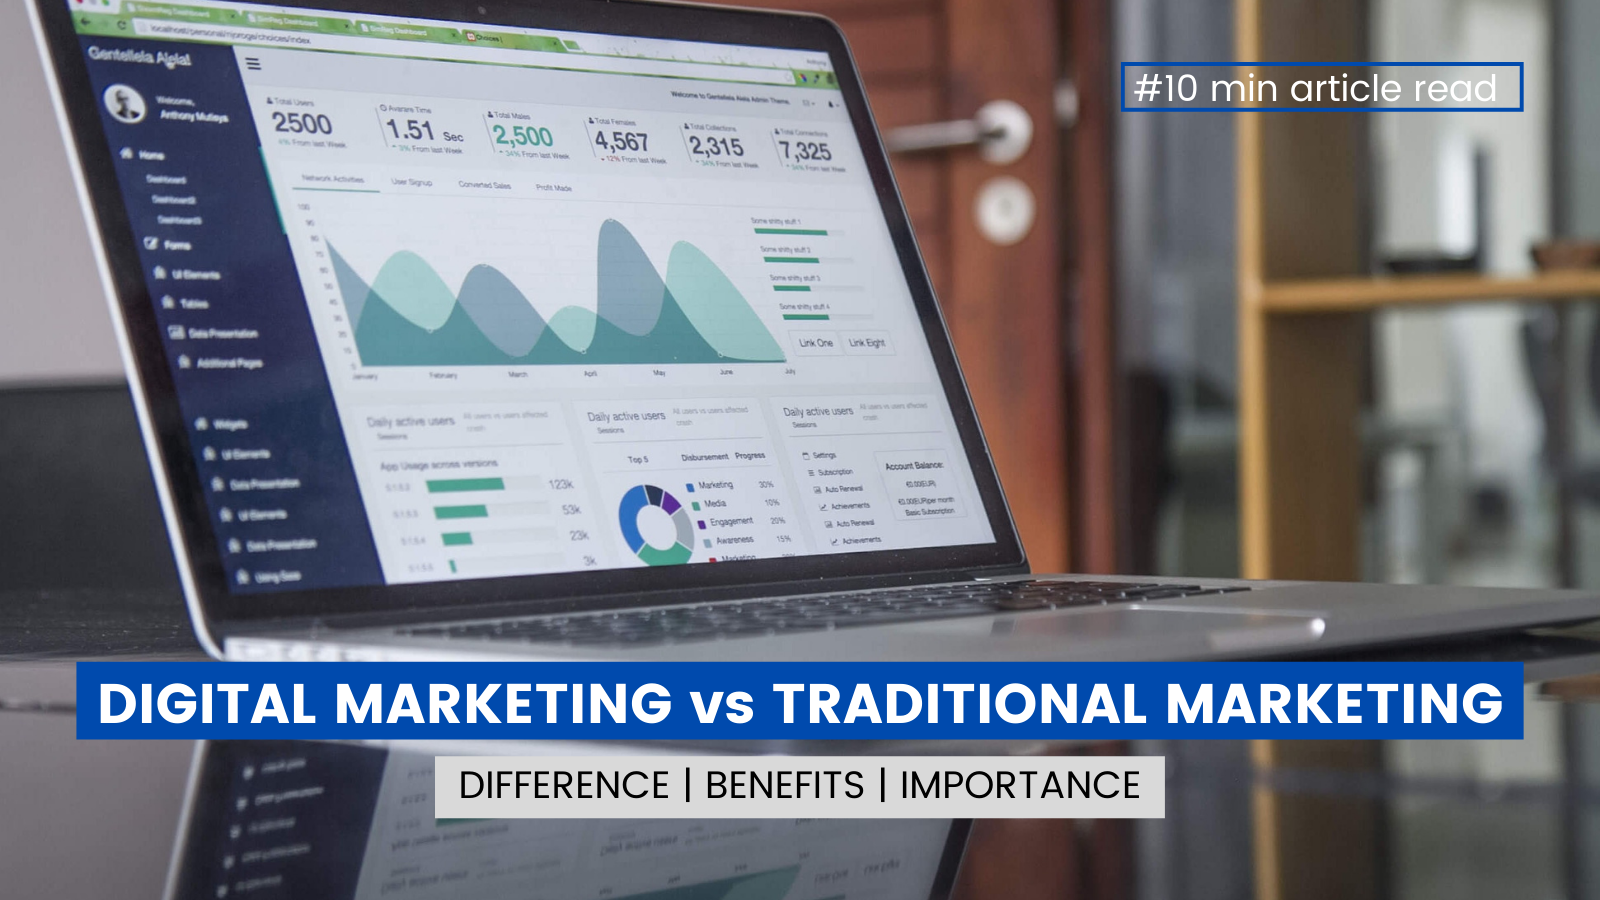 Why digital marketing is better than traditional marketing